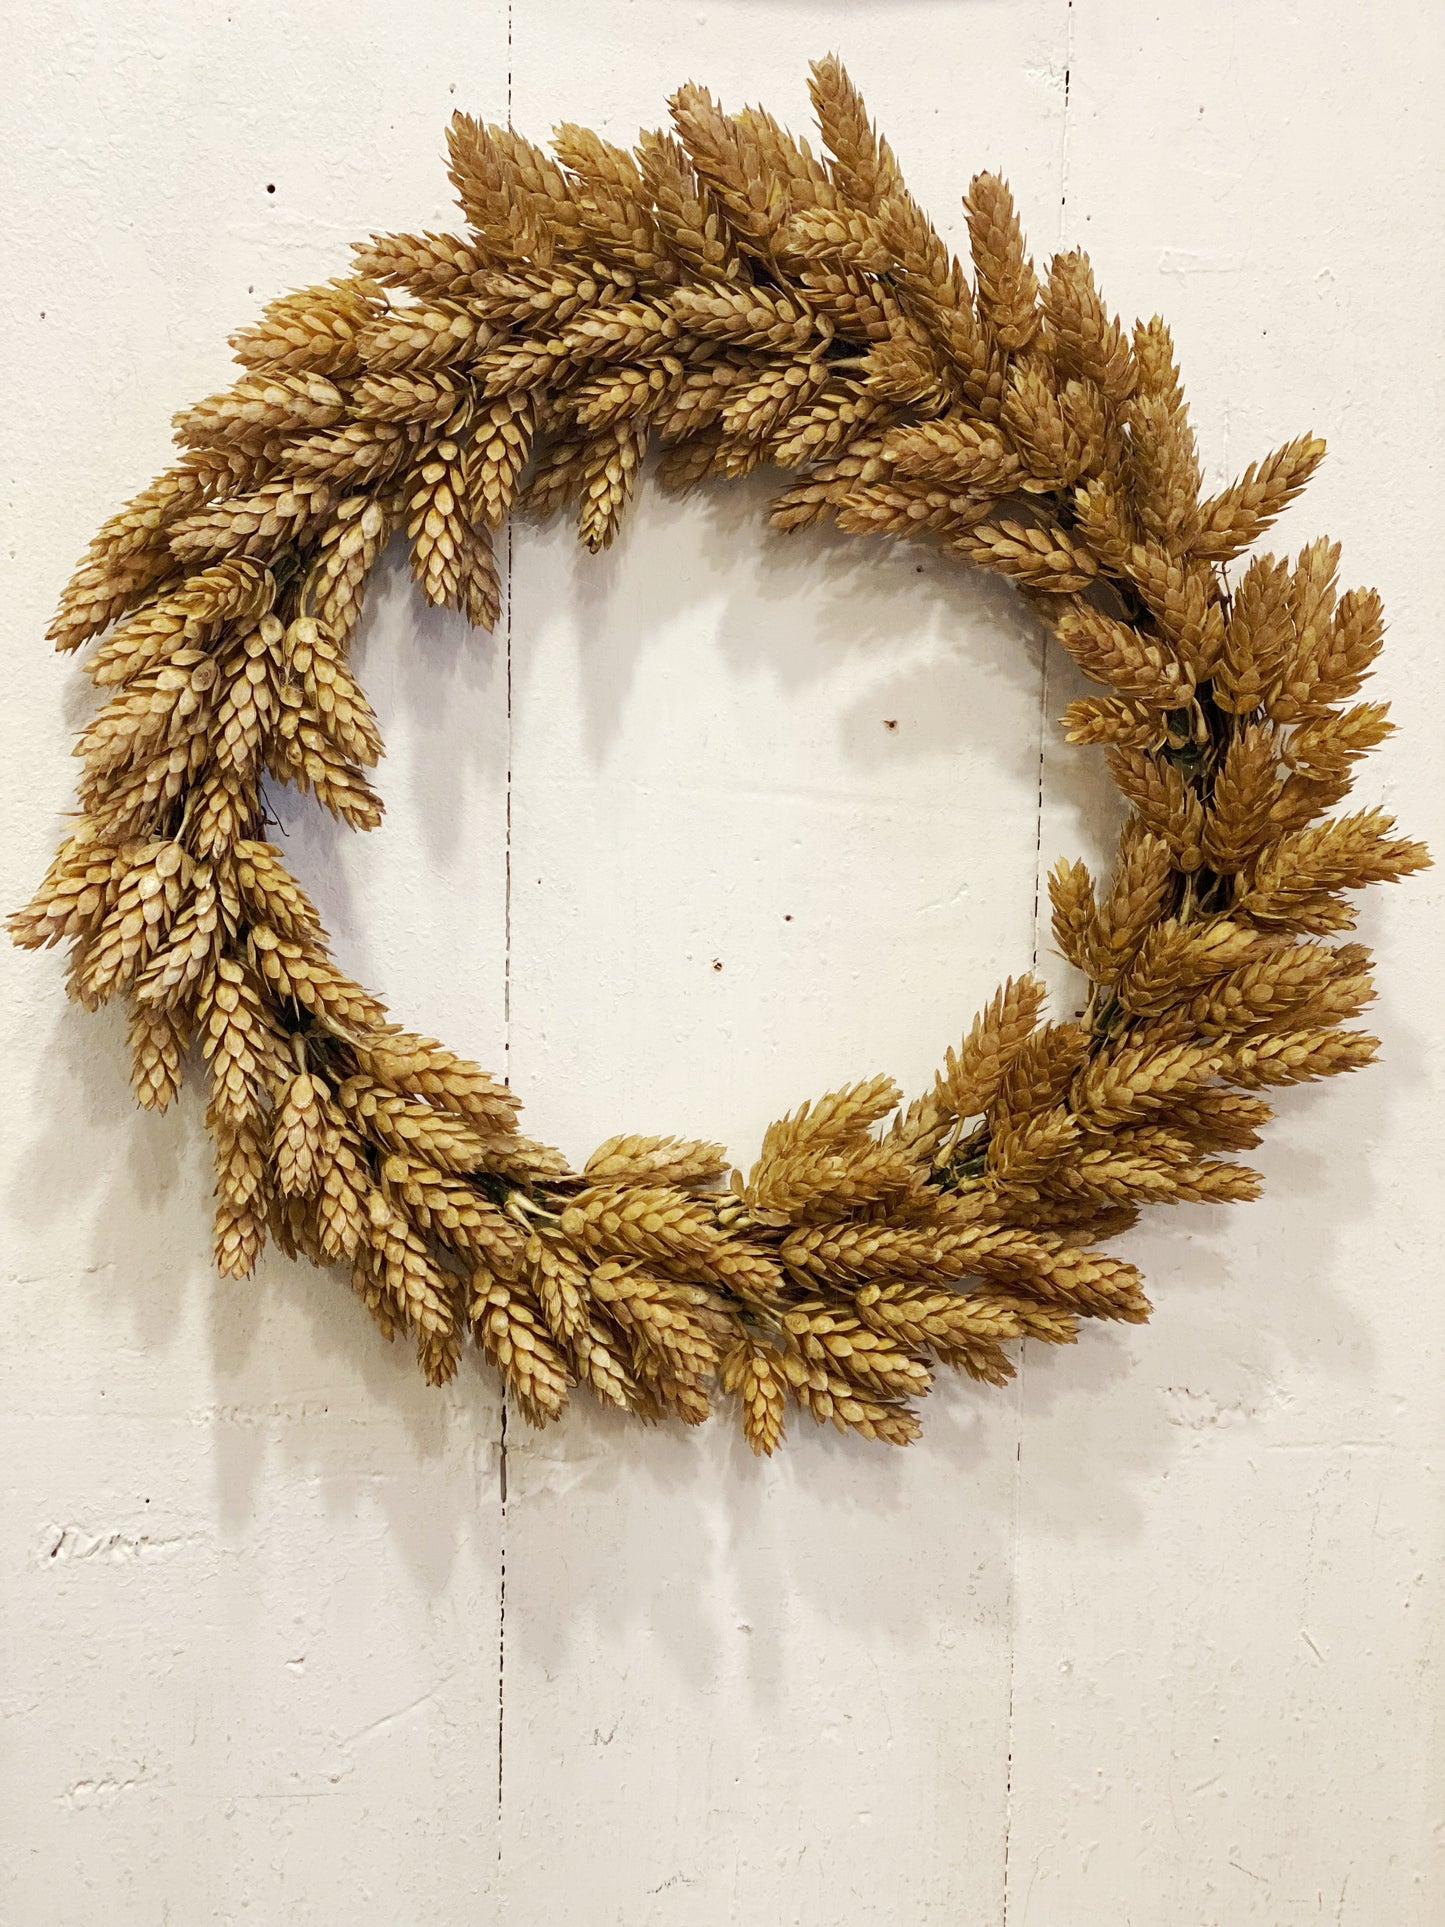 Hops wreath or candle ring